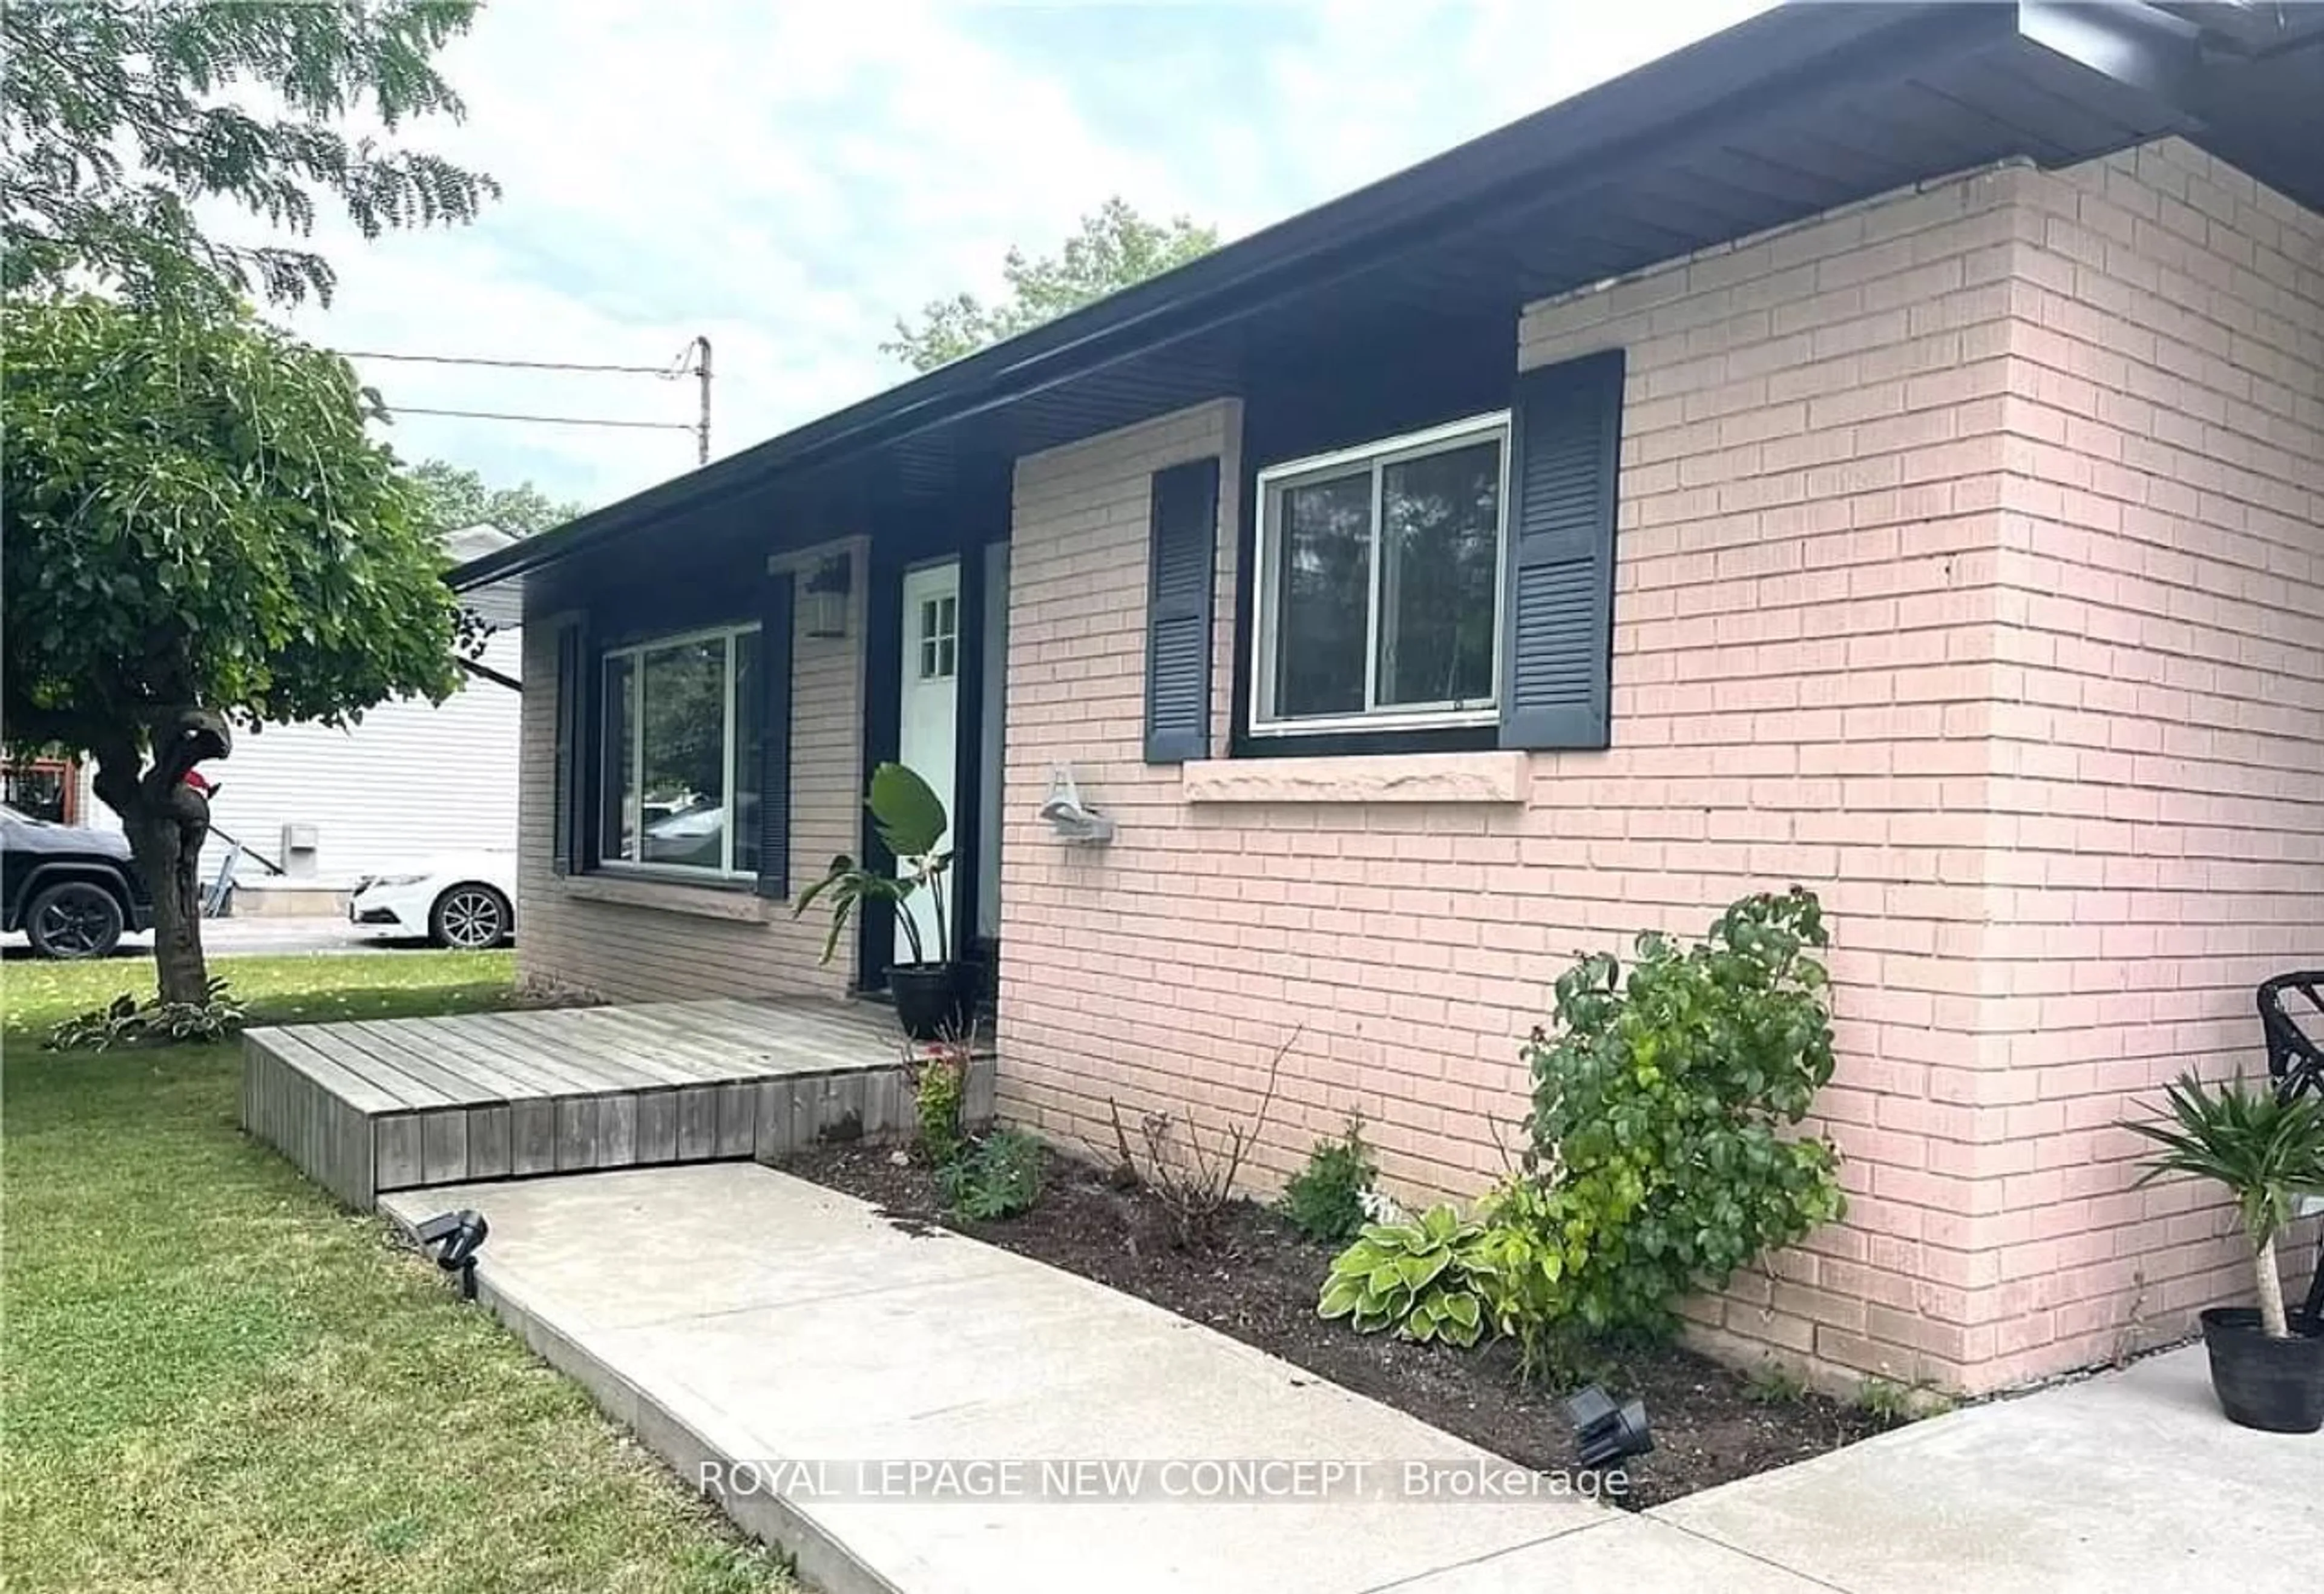 Home with brick exterior material for 3522 Edinburgh Rd, Fort Erie Ontario L0S 1J0